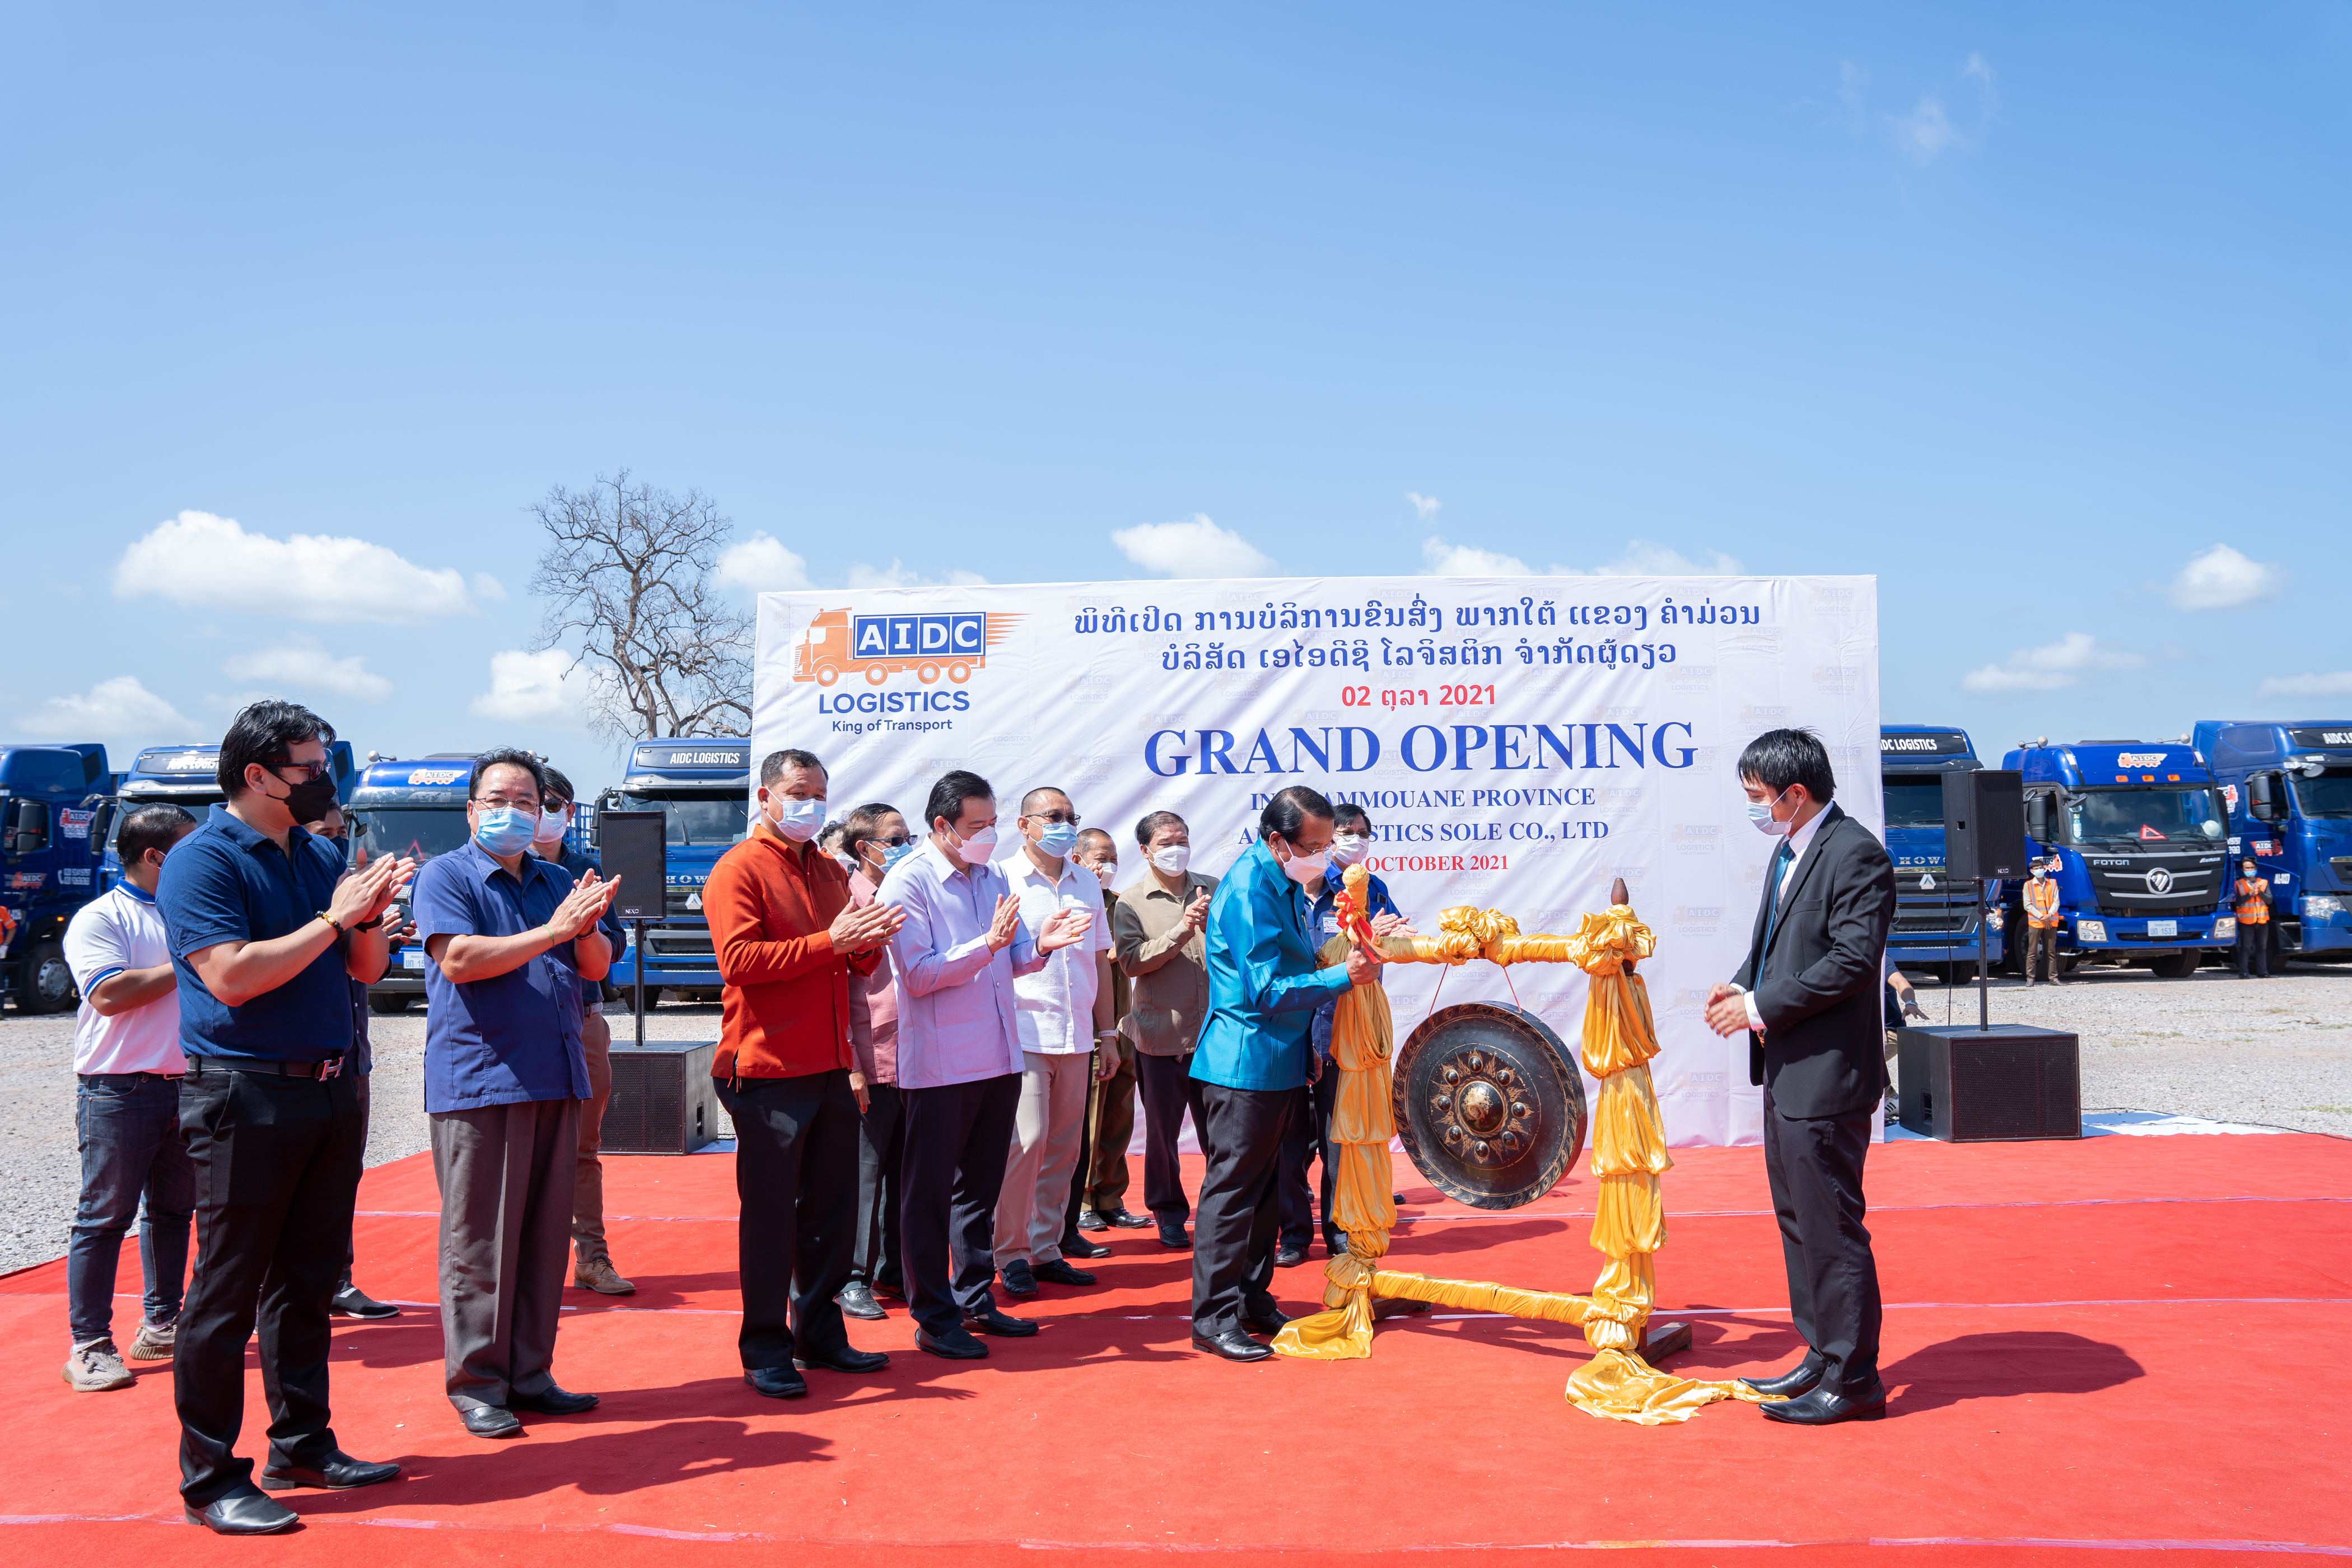 aidc logistic grand opening in khammouan province  02 oct 2021 